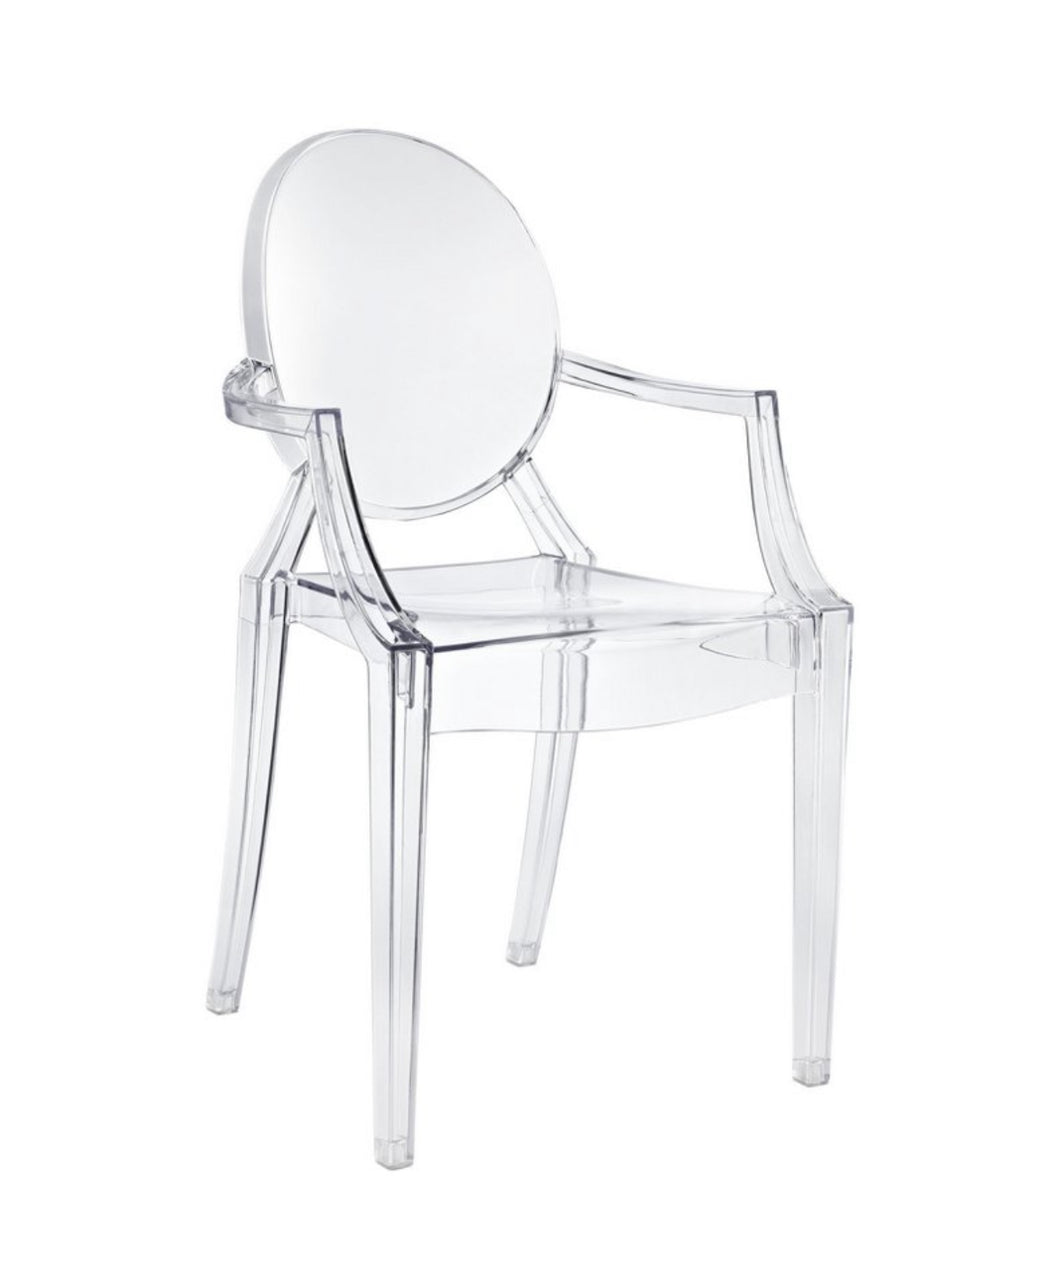 12 Crystal Chairs